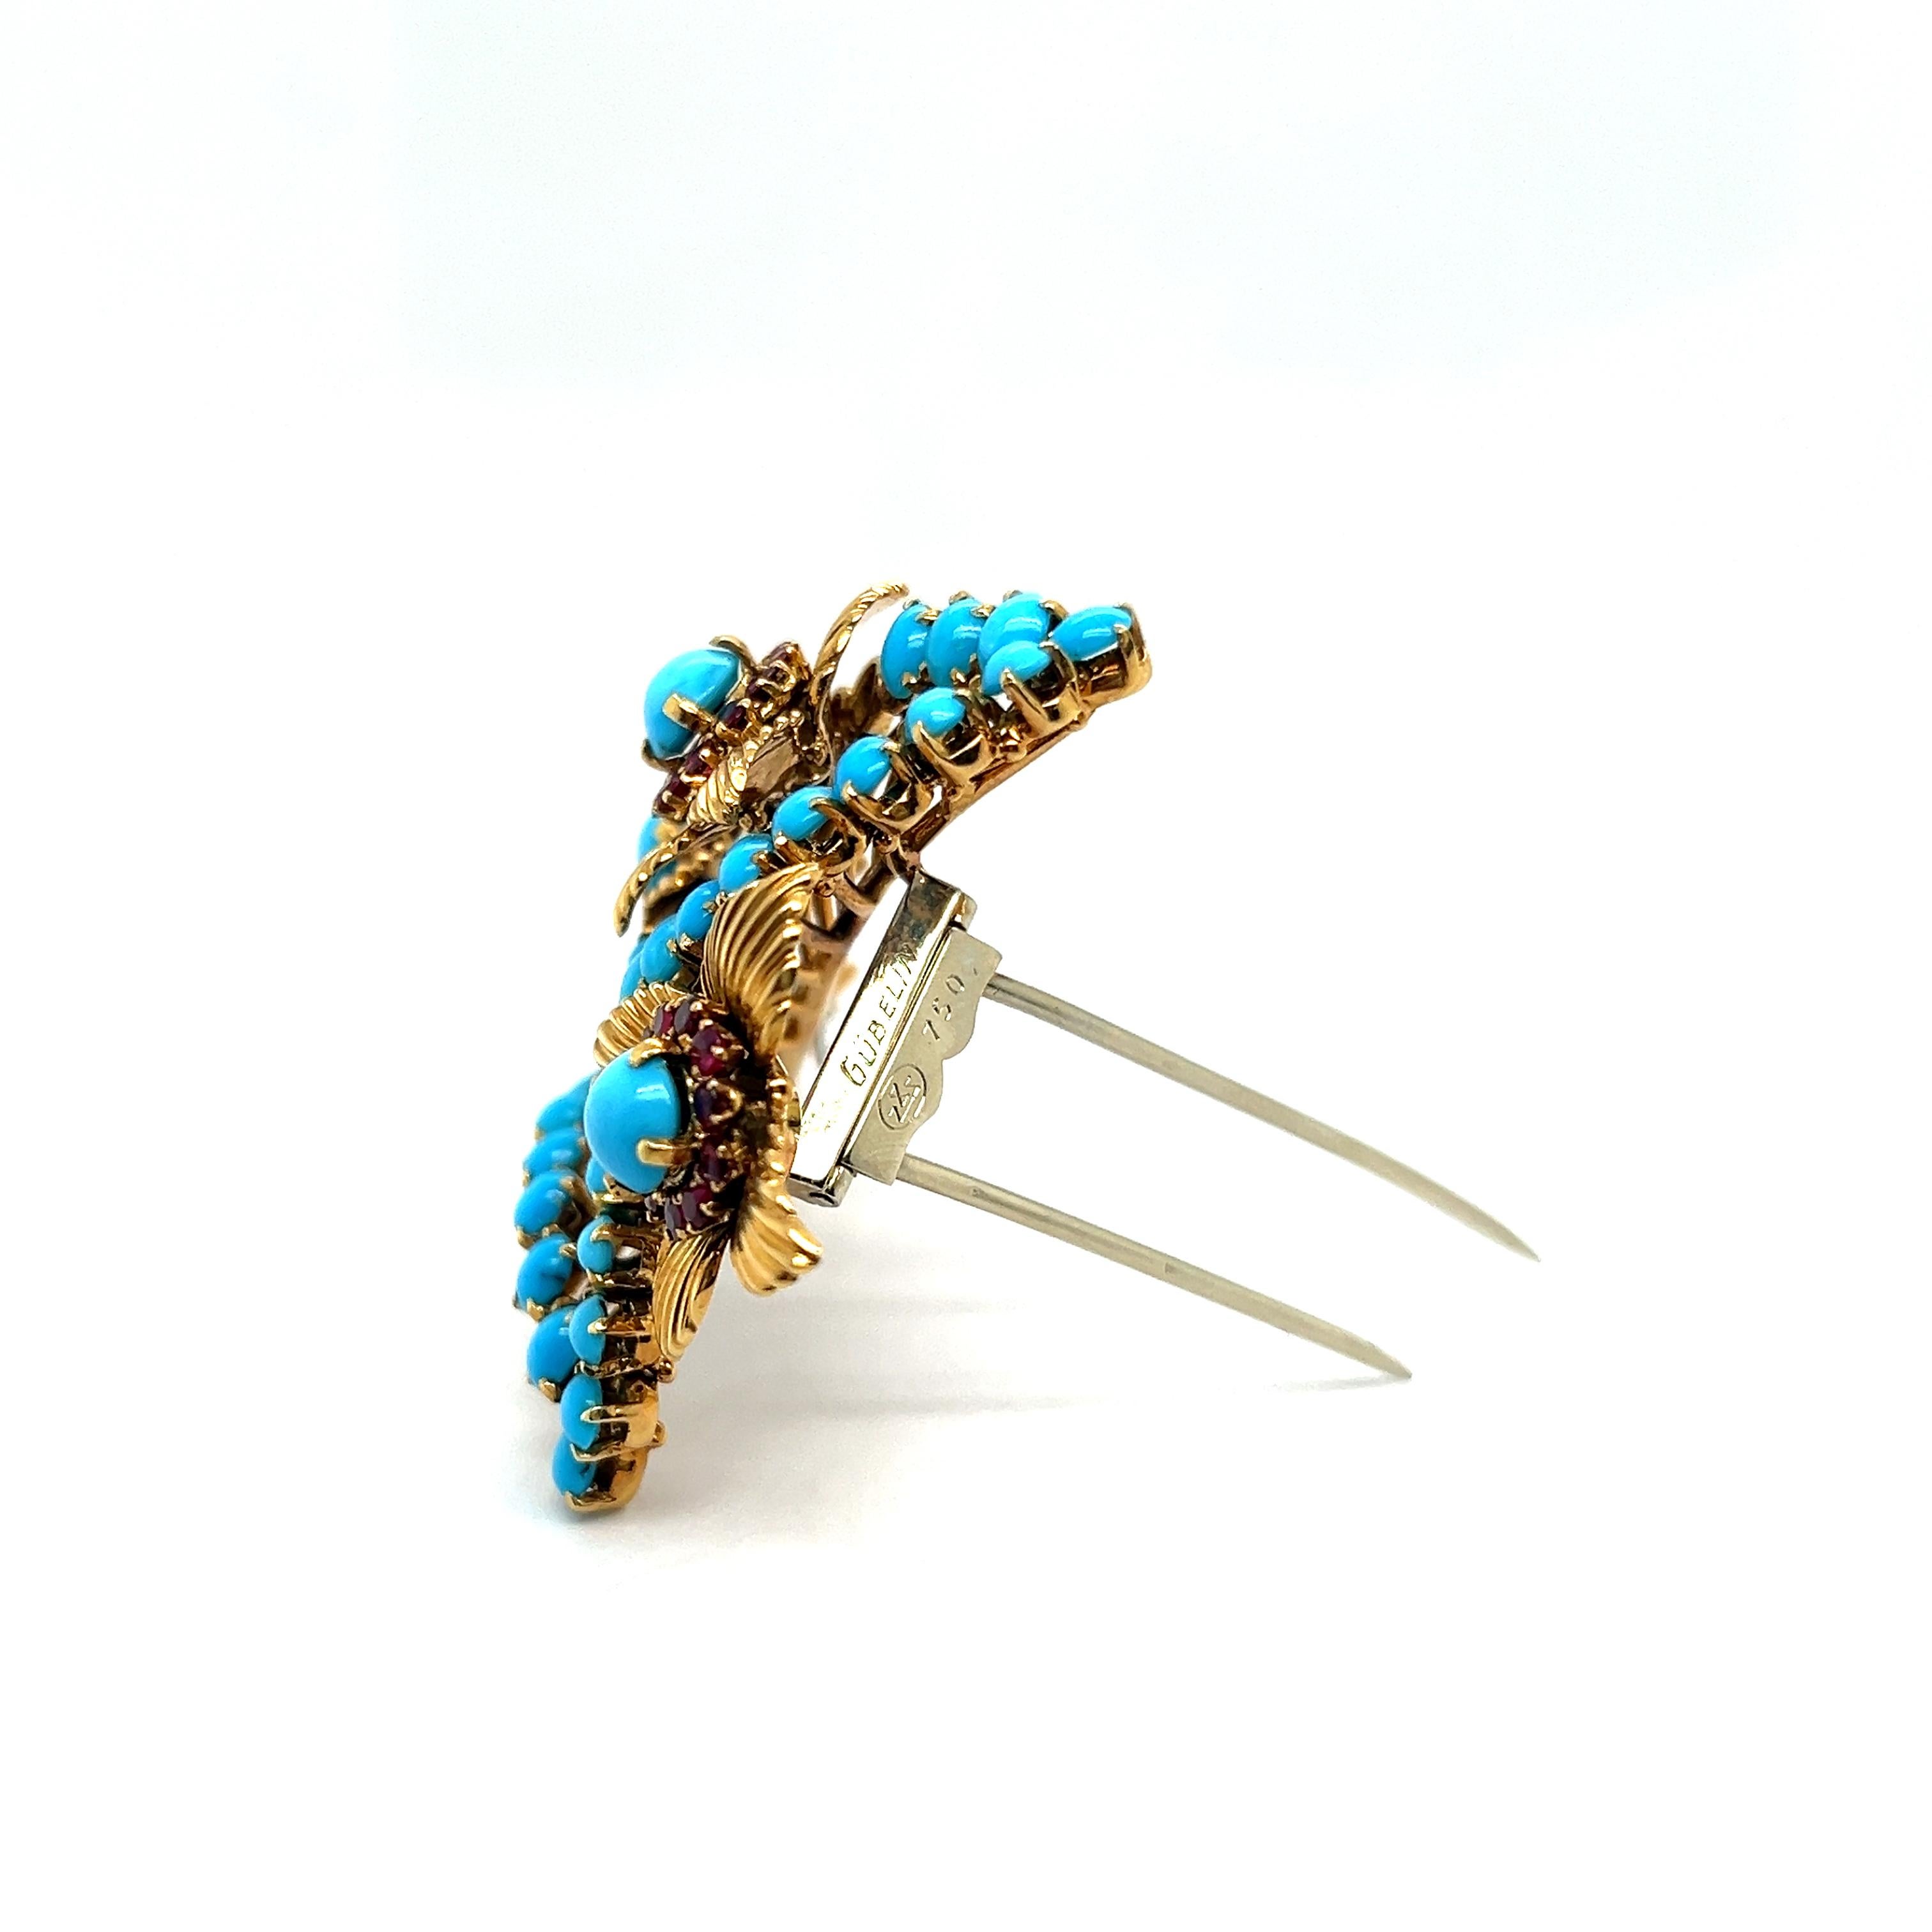 Brooch with Turquoise, Rubies & Diamonds in 18 Karat Yellow Gold by Gübelin For Sale 5